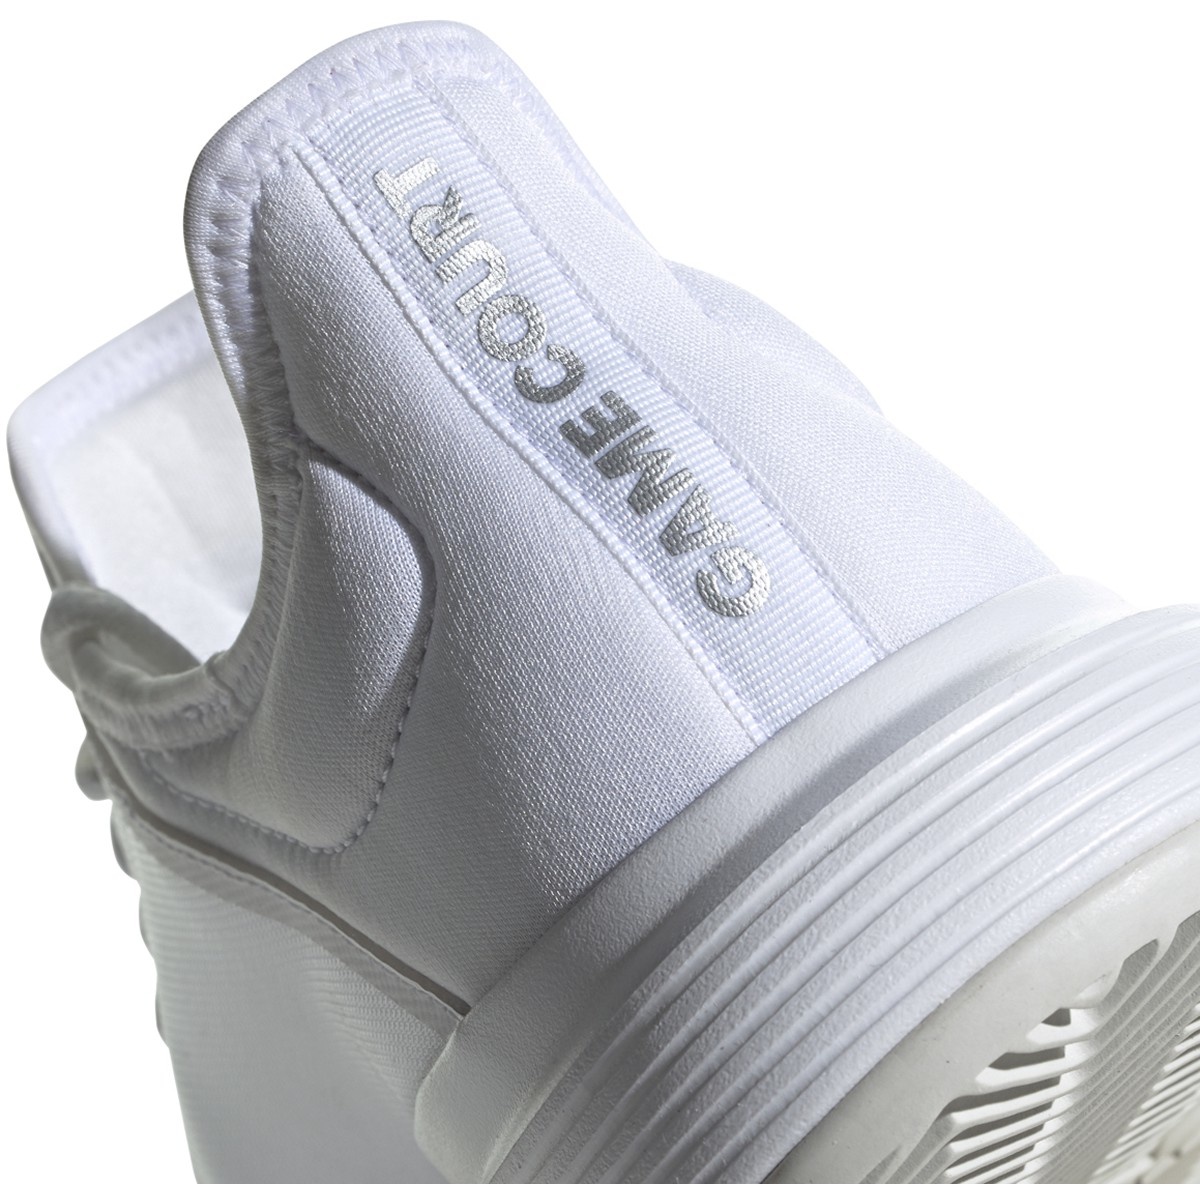 adidas womens wide shoes